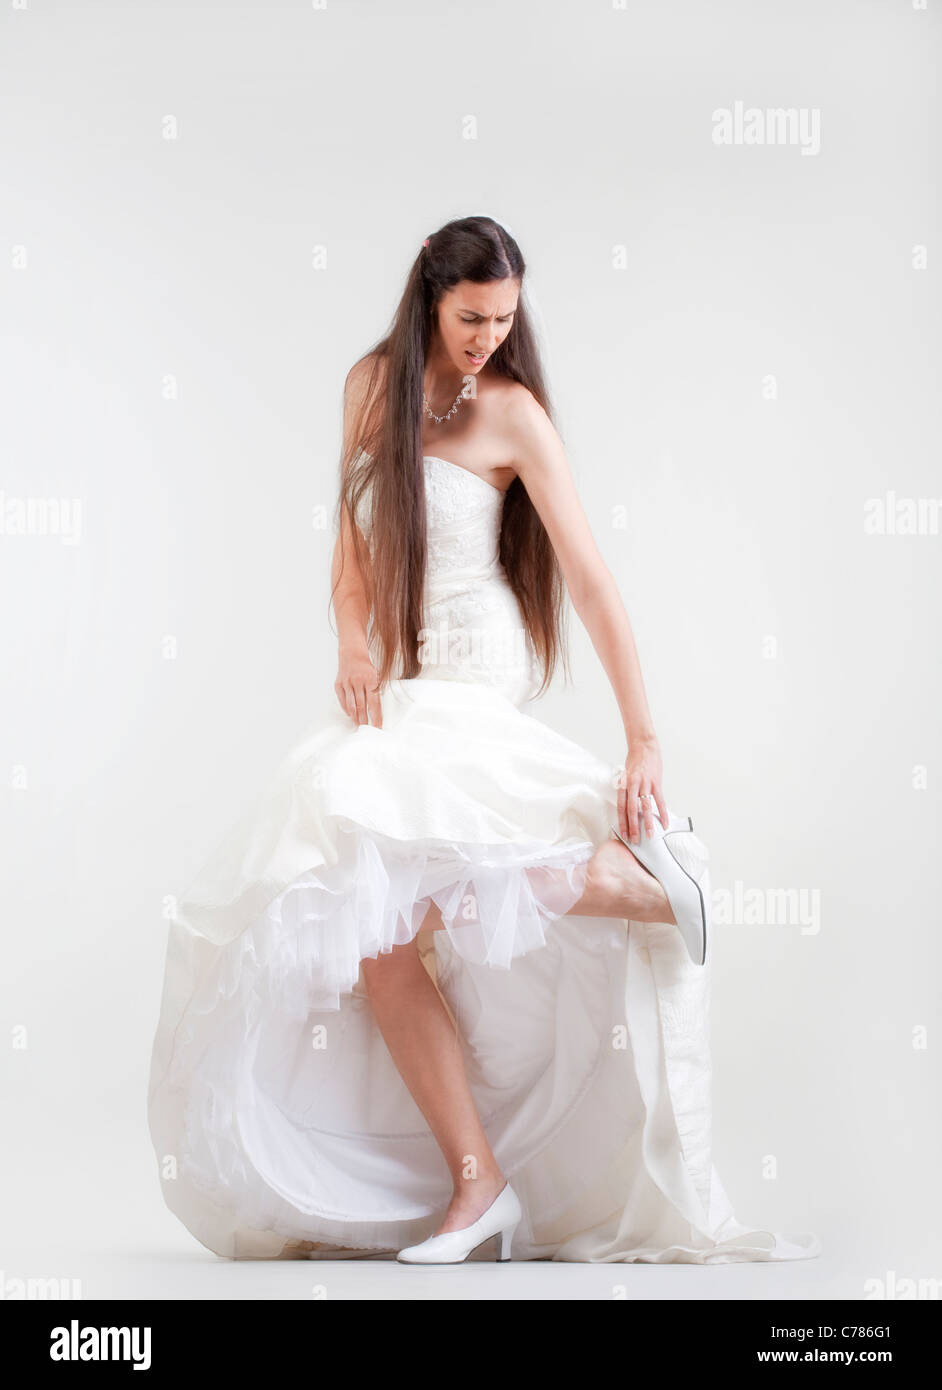 bride in wedding dress taking off her shoe checking her hurting foot Stock Photo